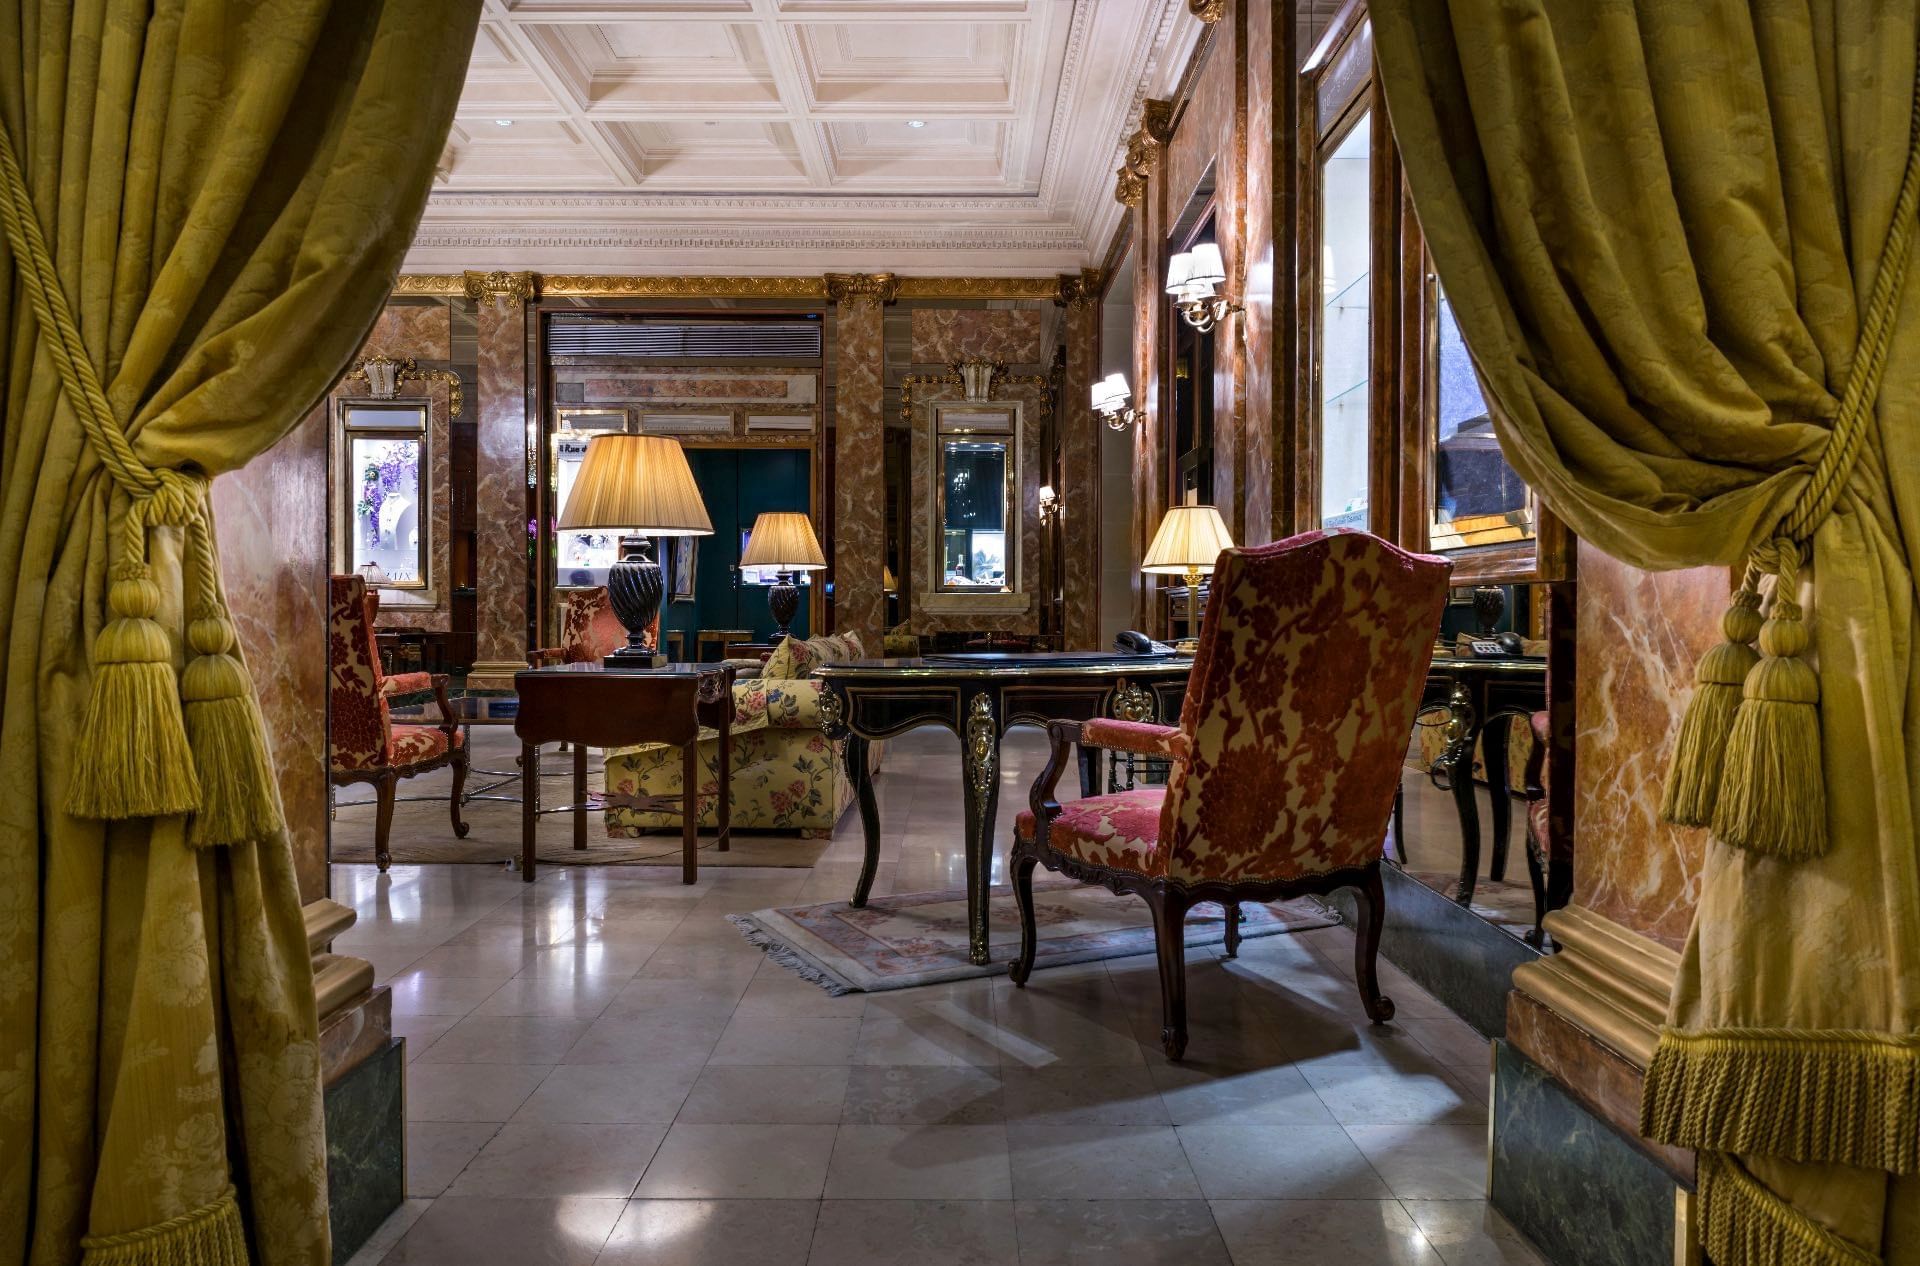 Interior of the Lobby lounge area at Westminster Warwick Paris